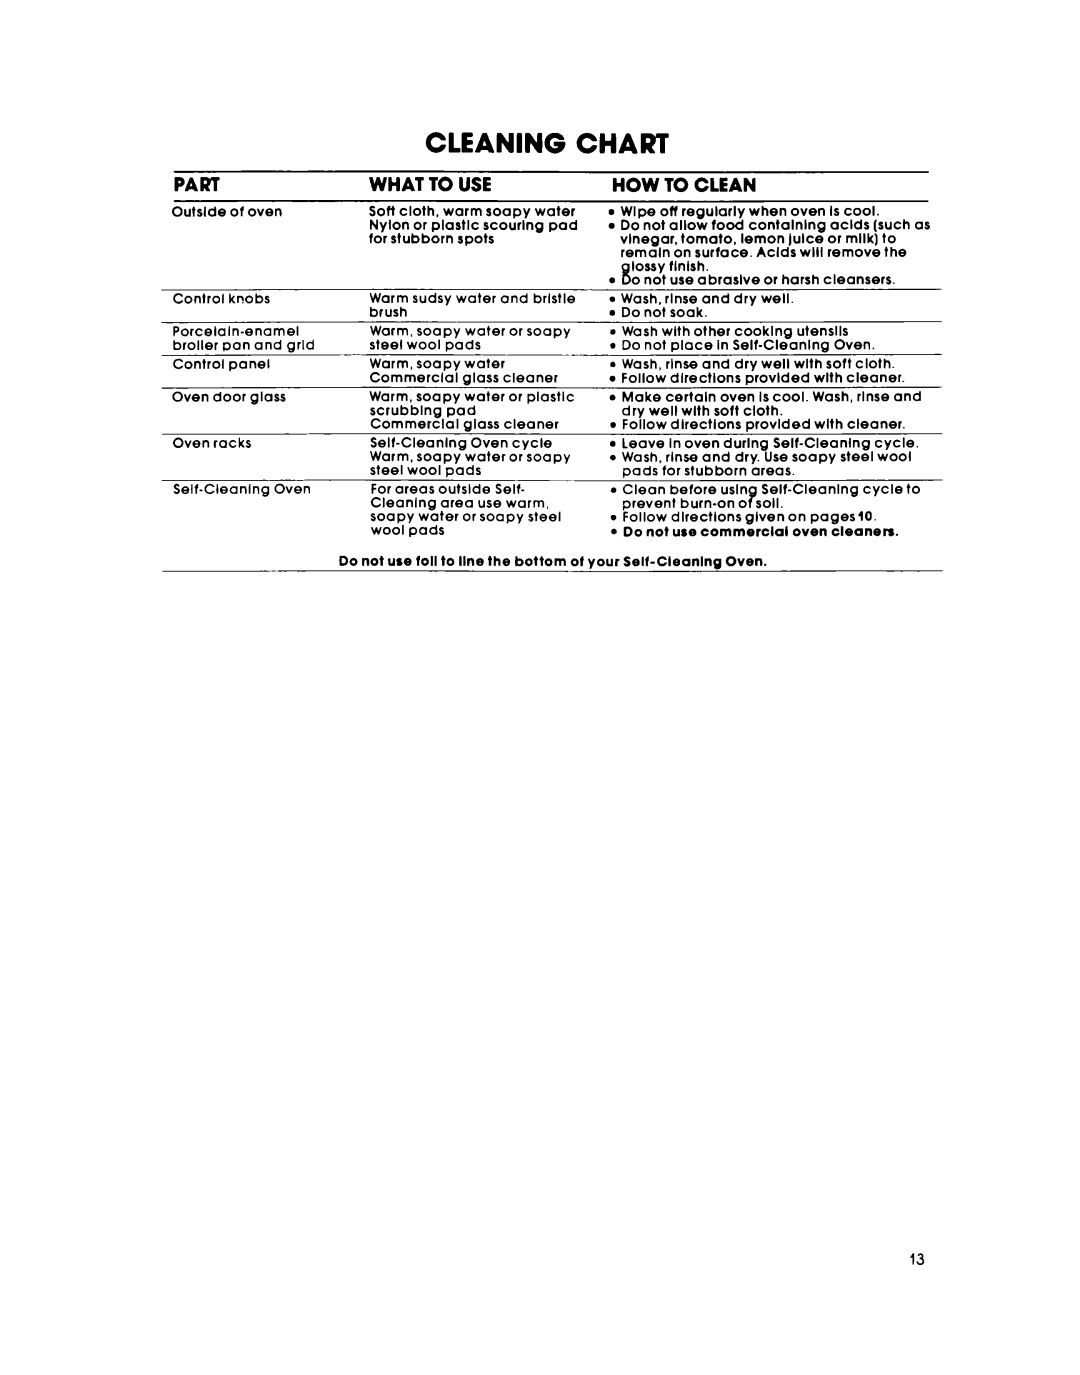 Whirlpool RB26OOXK warranty Cleaning Chart, What To Use, How To Clean 